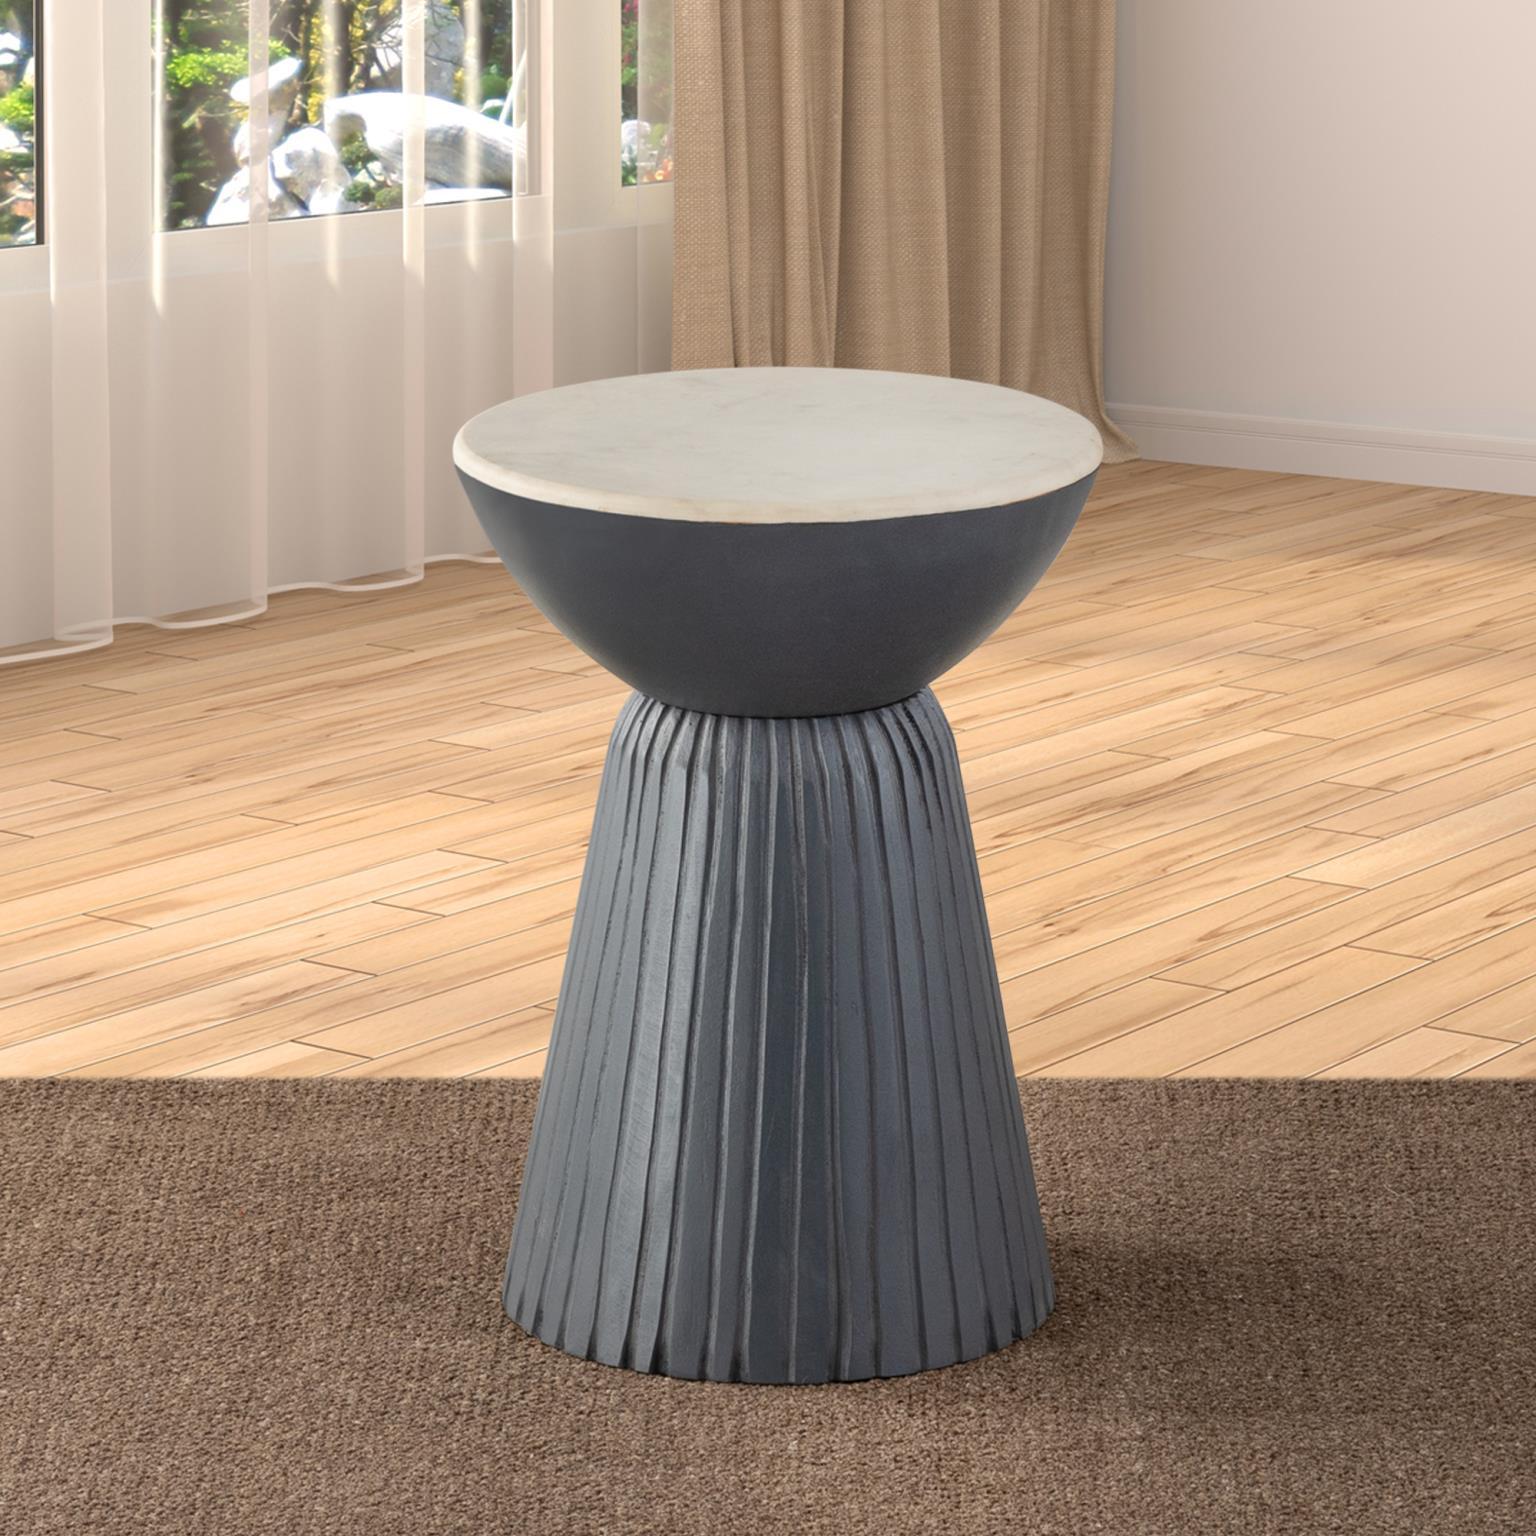 Contemporary, Modern Side Table 169-15 Round Side Table 718852652918 718852652918 in Marble, White, Gray 